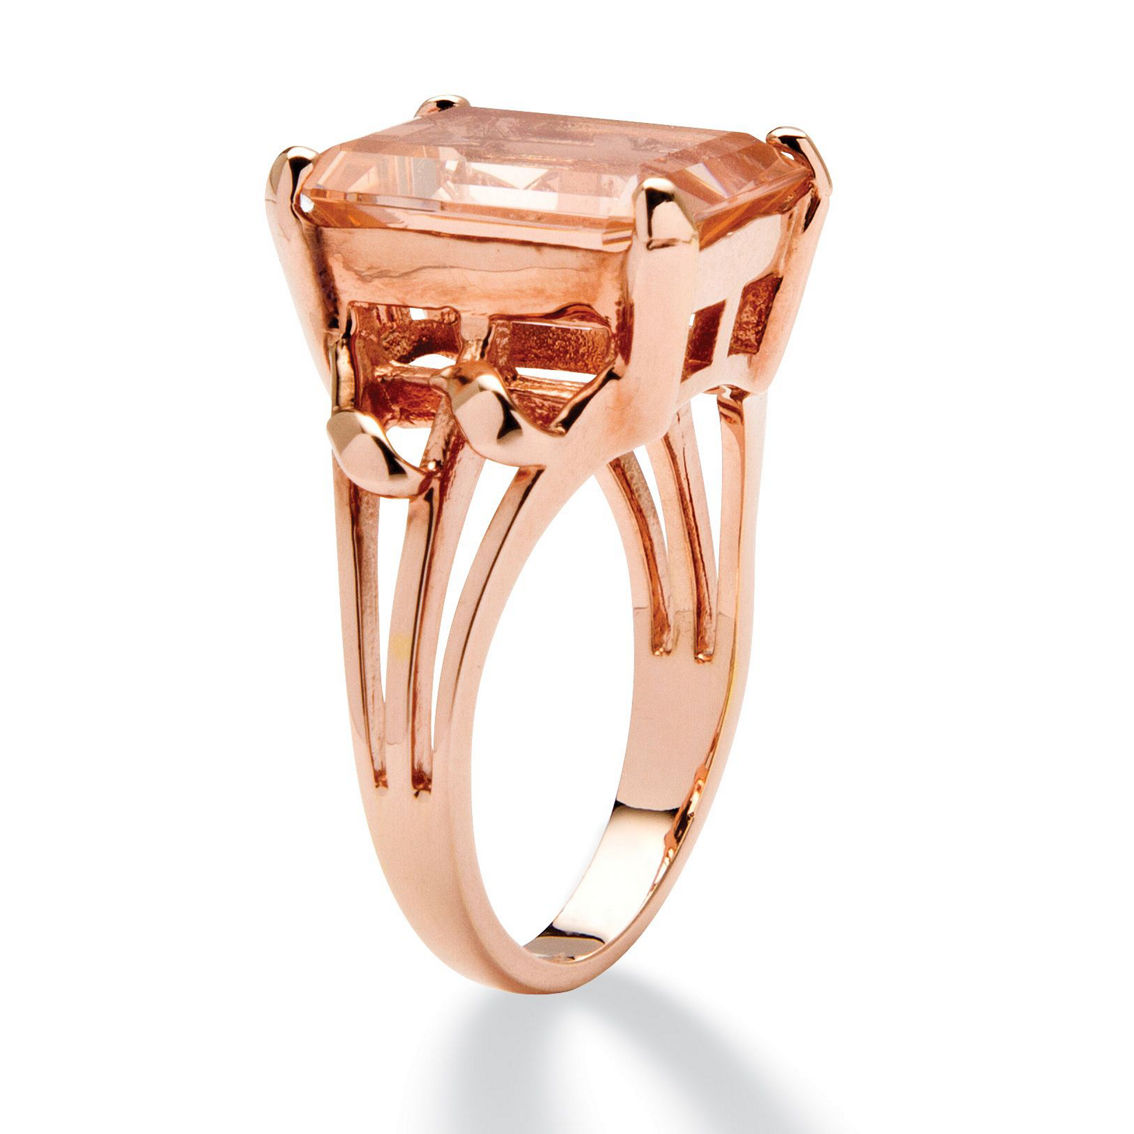 PalmBeach Emerald-Cut Simulated Morganite Ring in Rose Gold-Plated Silver - Image 2 of 5